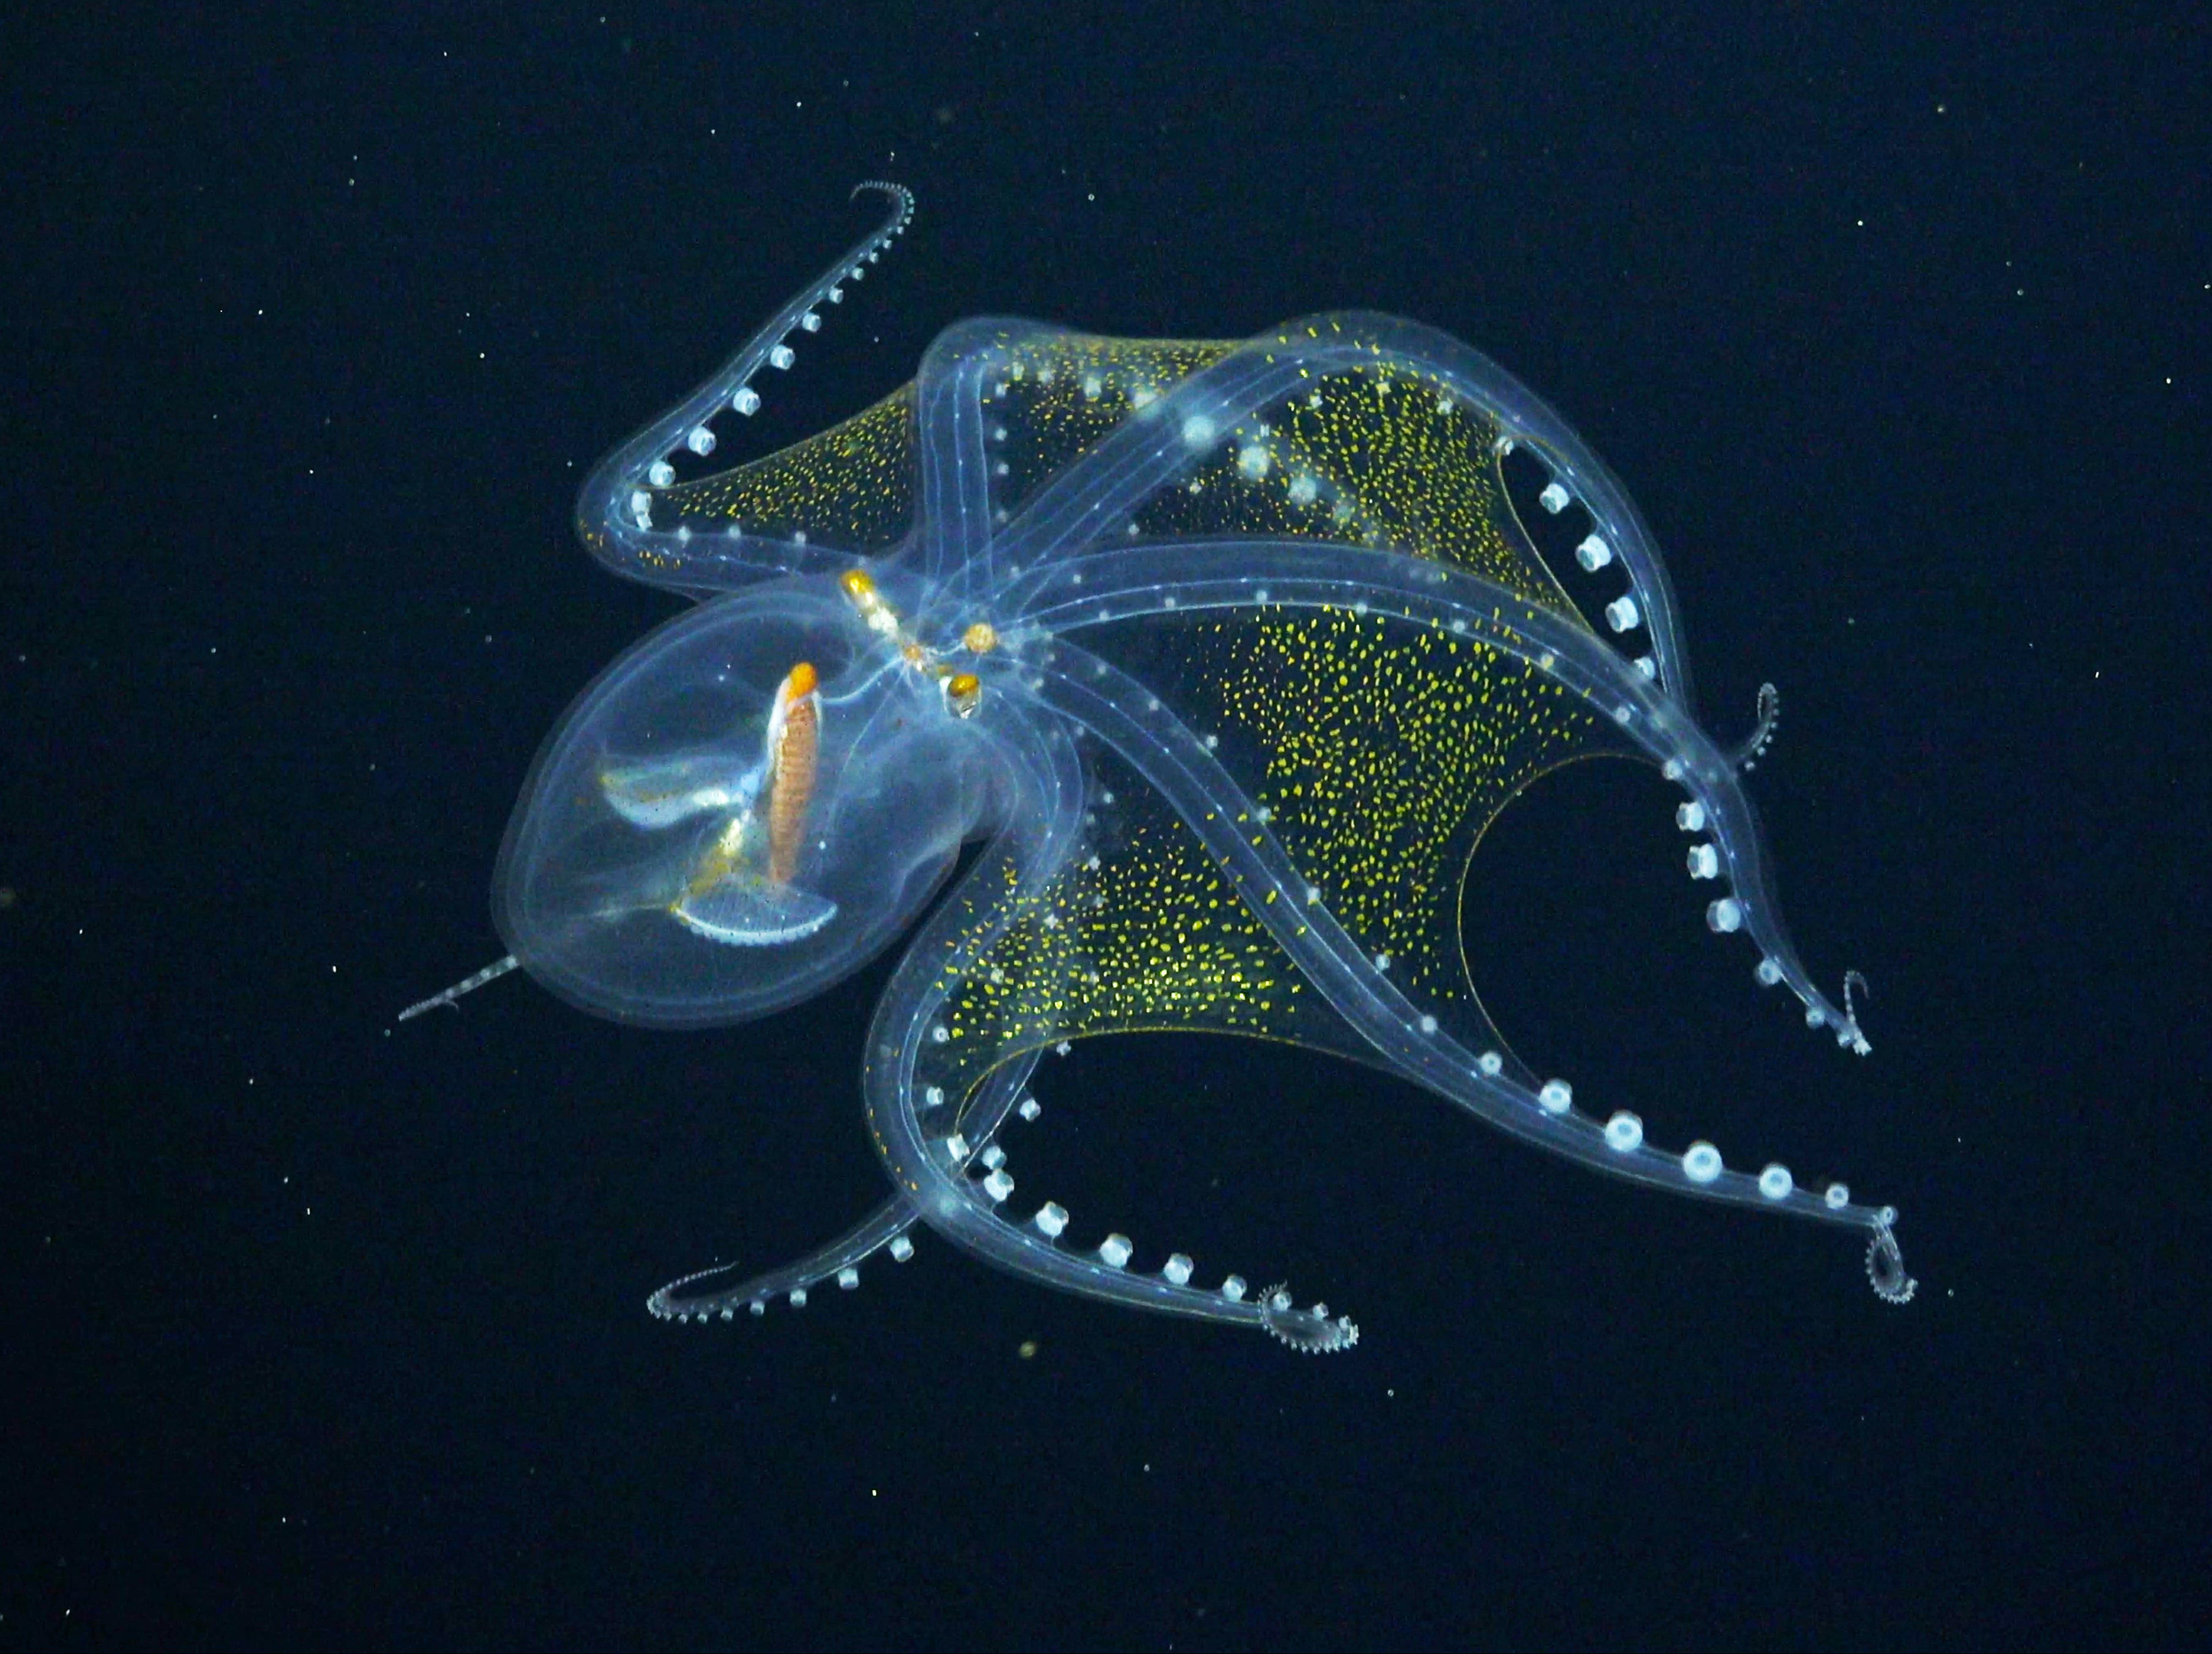 The octopus, known as Vitreledonella richardi, has only a few visible features - its optic nerve, eyeballs and digestive tract